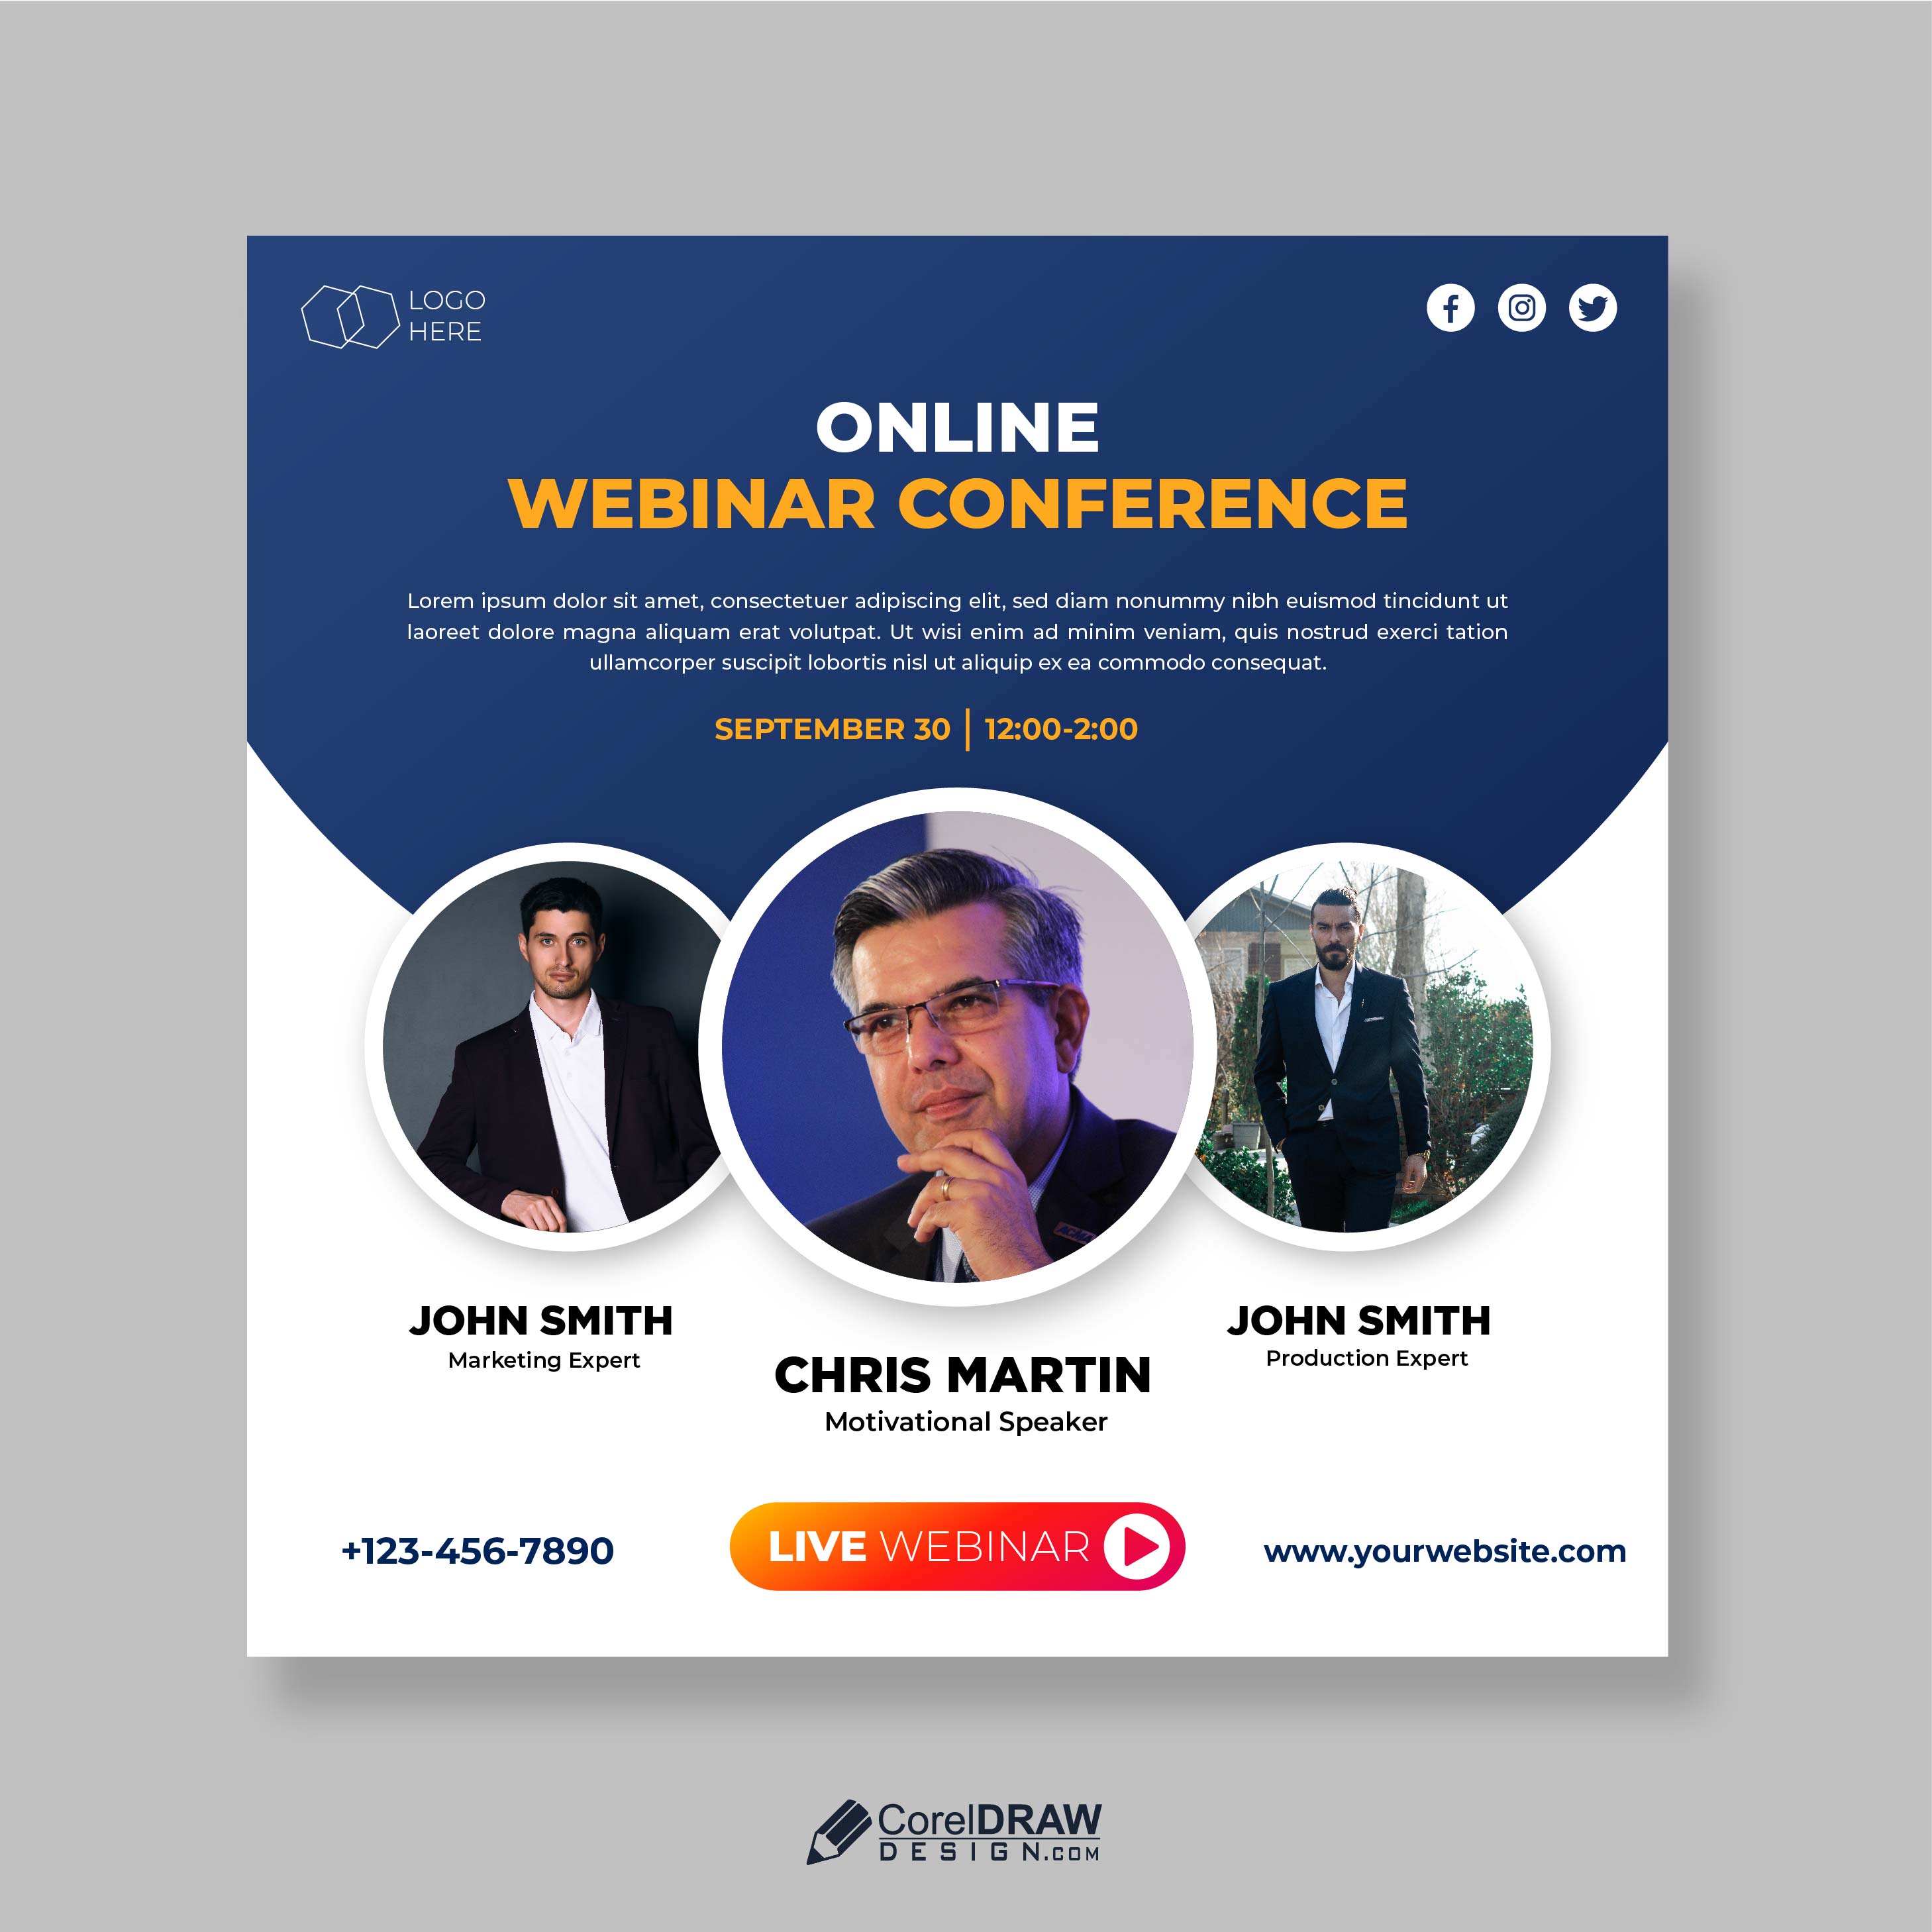 Download Abstract Corporate Live Webinar Poster Vector Template